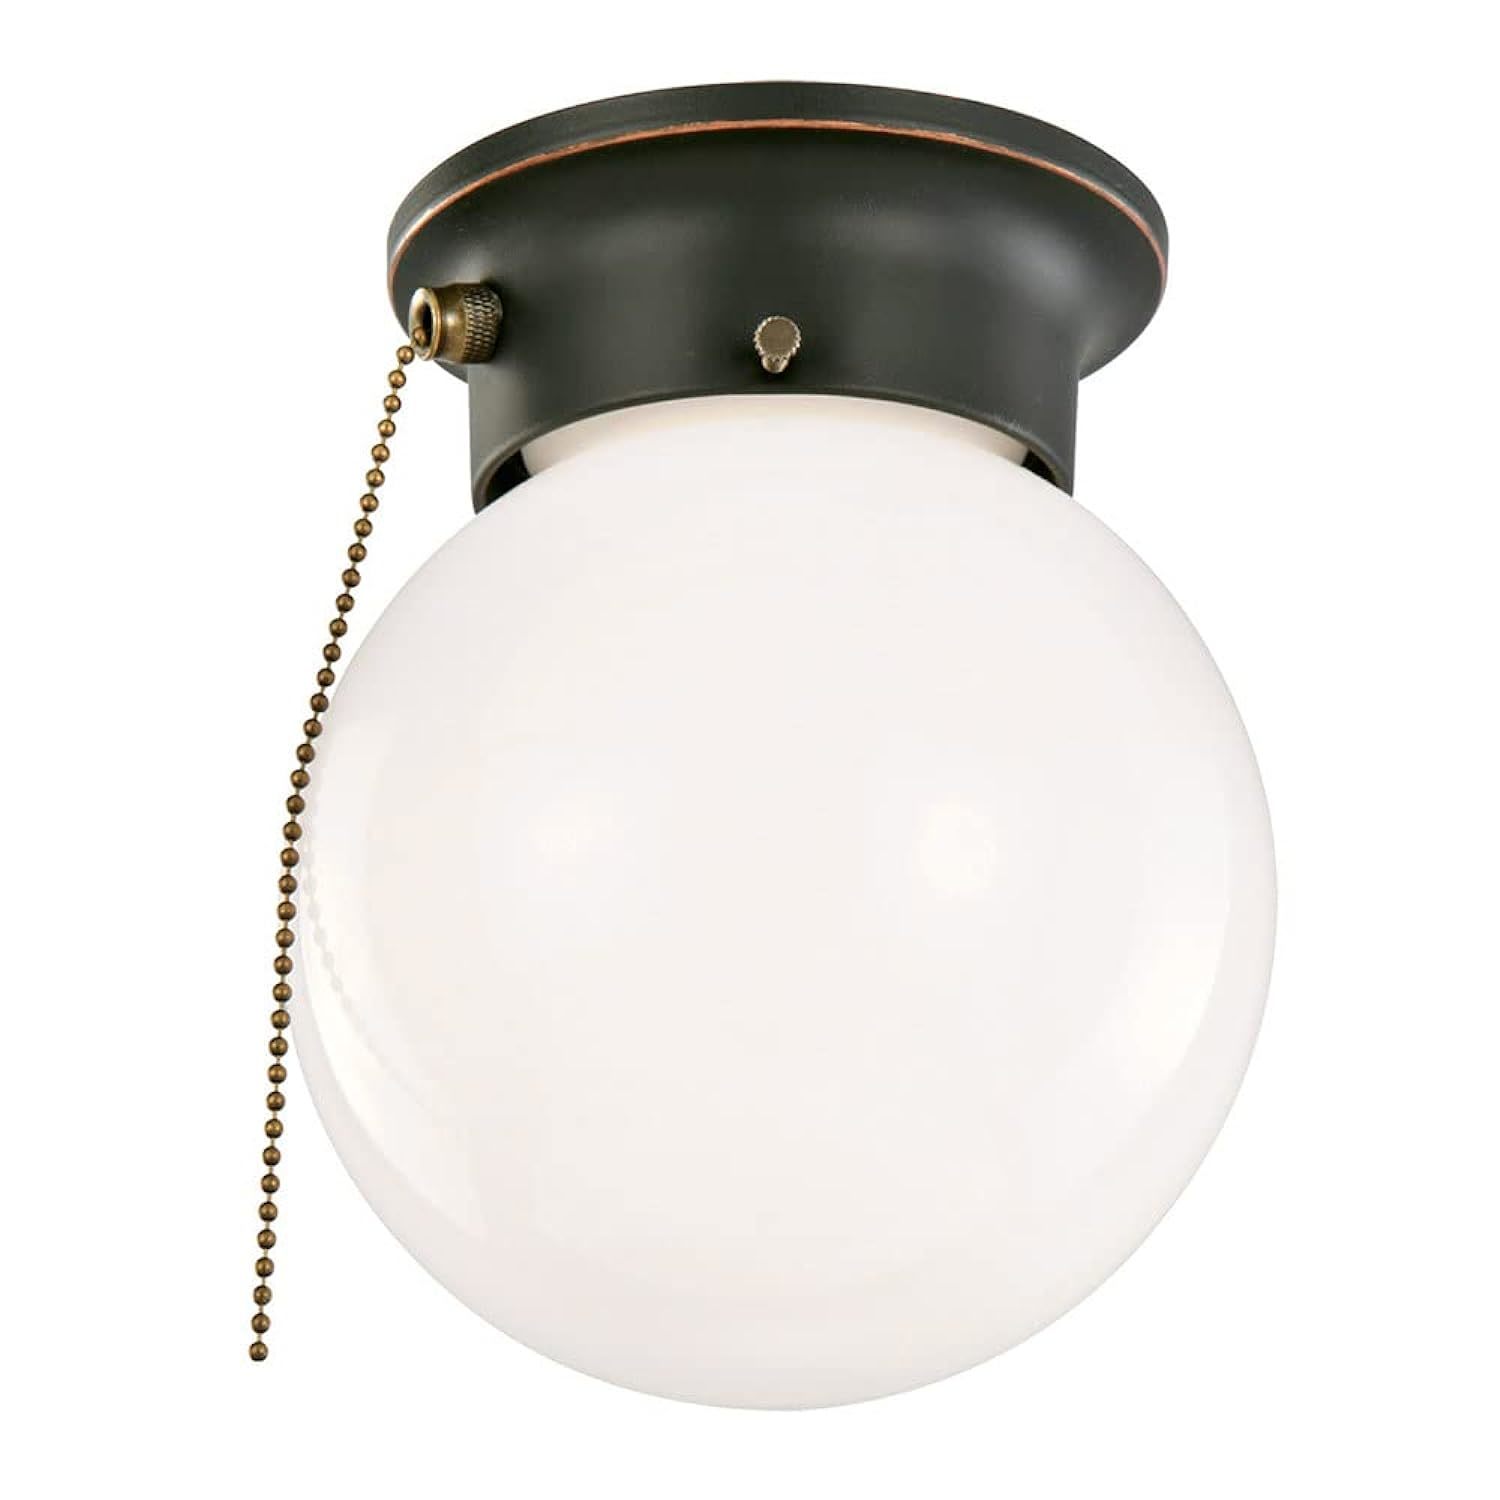 Primary image for Design House 519264 Traditional 1-Light Indoor Ceiling Flush Mount Dimmable Glob